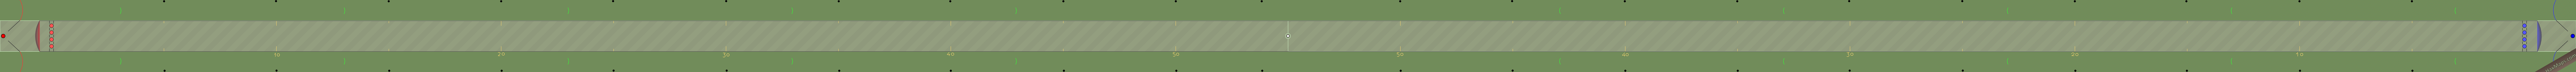 hax ball maps | Capture The Flag By Ika �